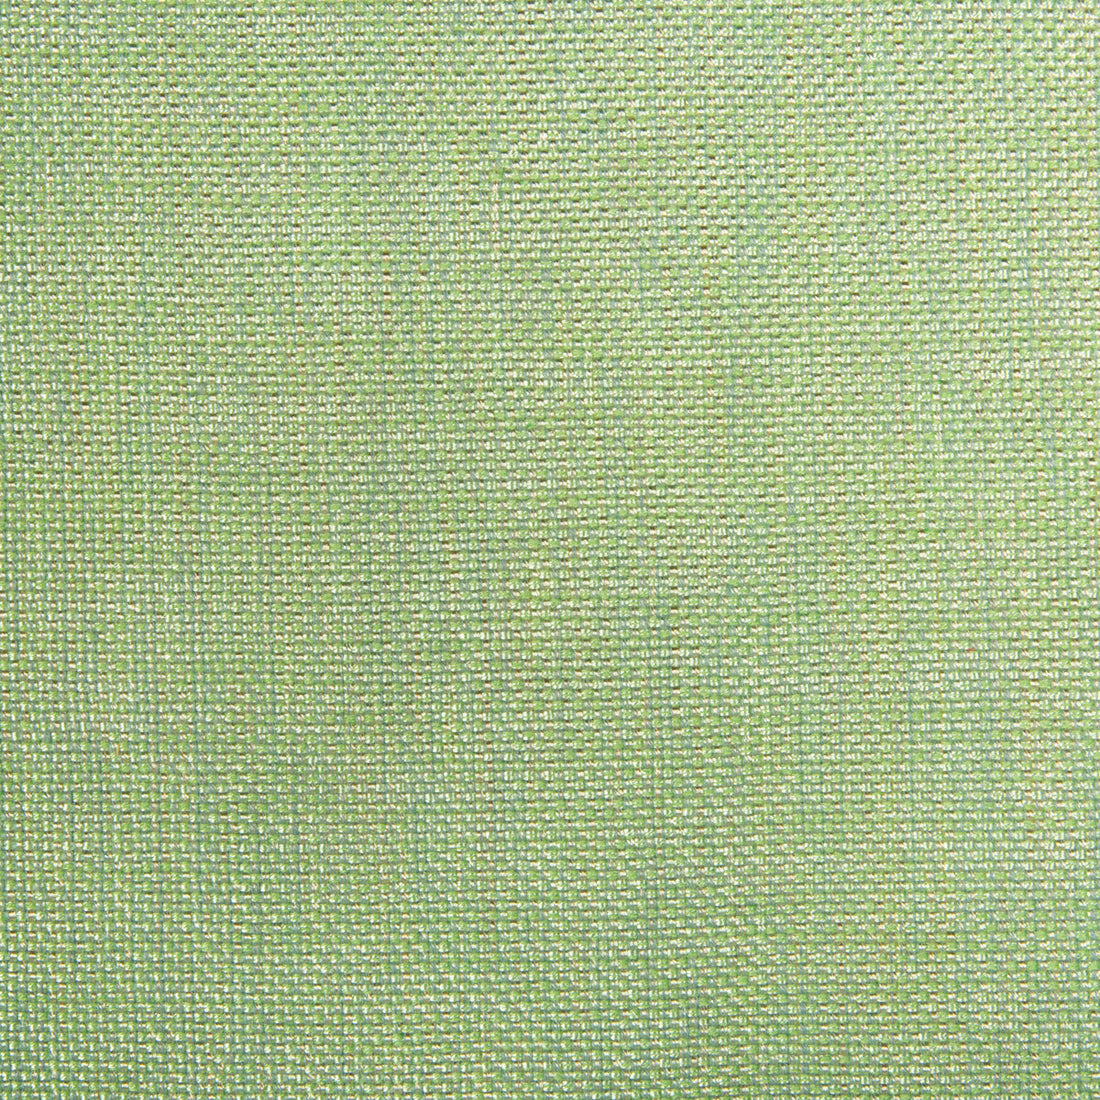 Kravet Contract fabric in 4458-123 color - pattern 4458.123.0 - by Kravet Contract